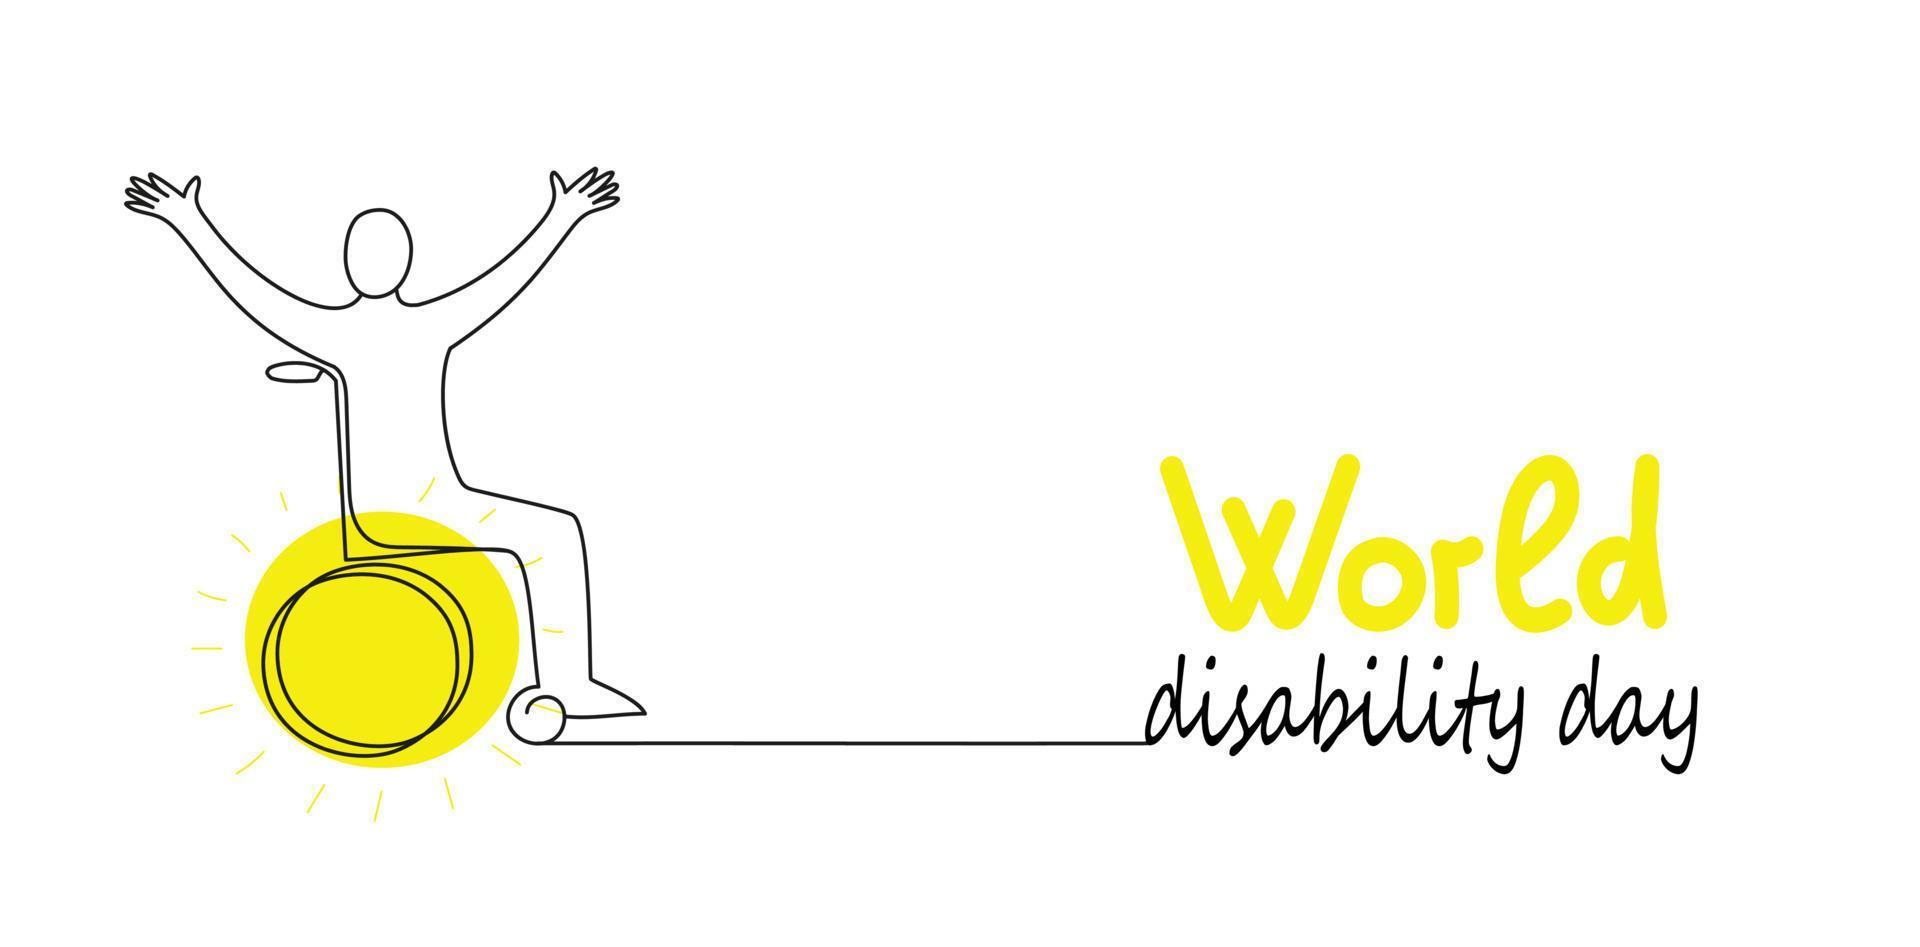 Person in wheelchair. World Disability day vector doodle banner. Continuous line drawing illustration for social media.